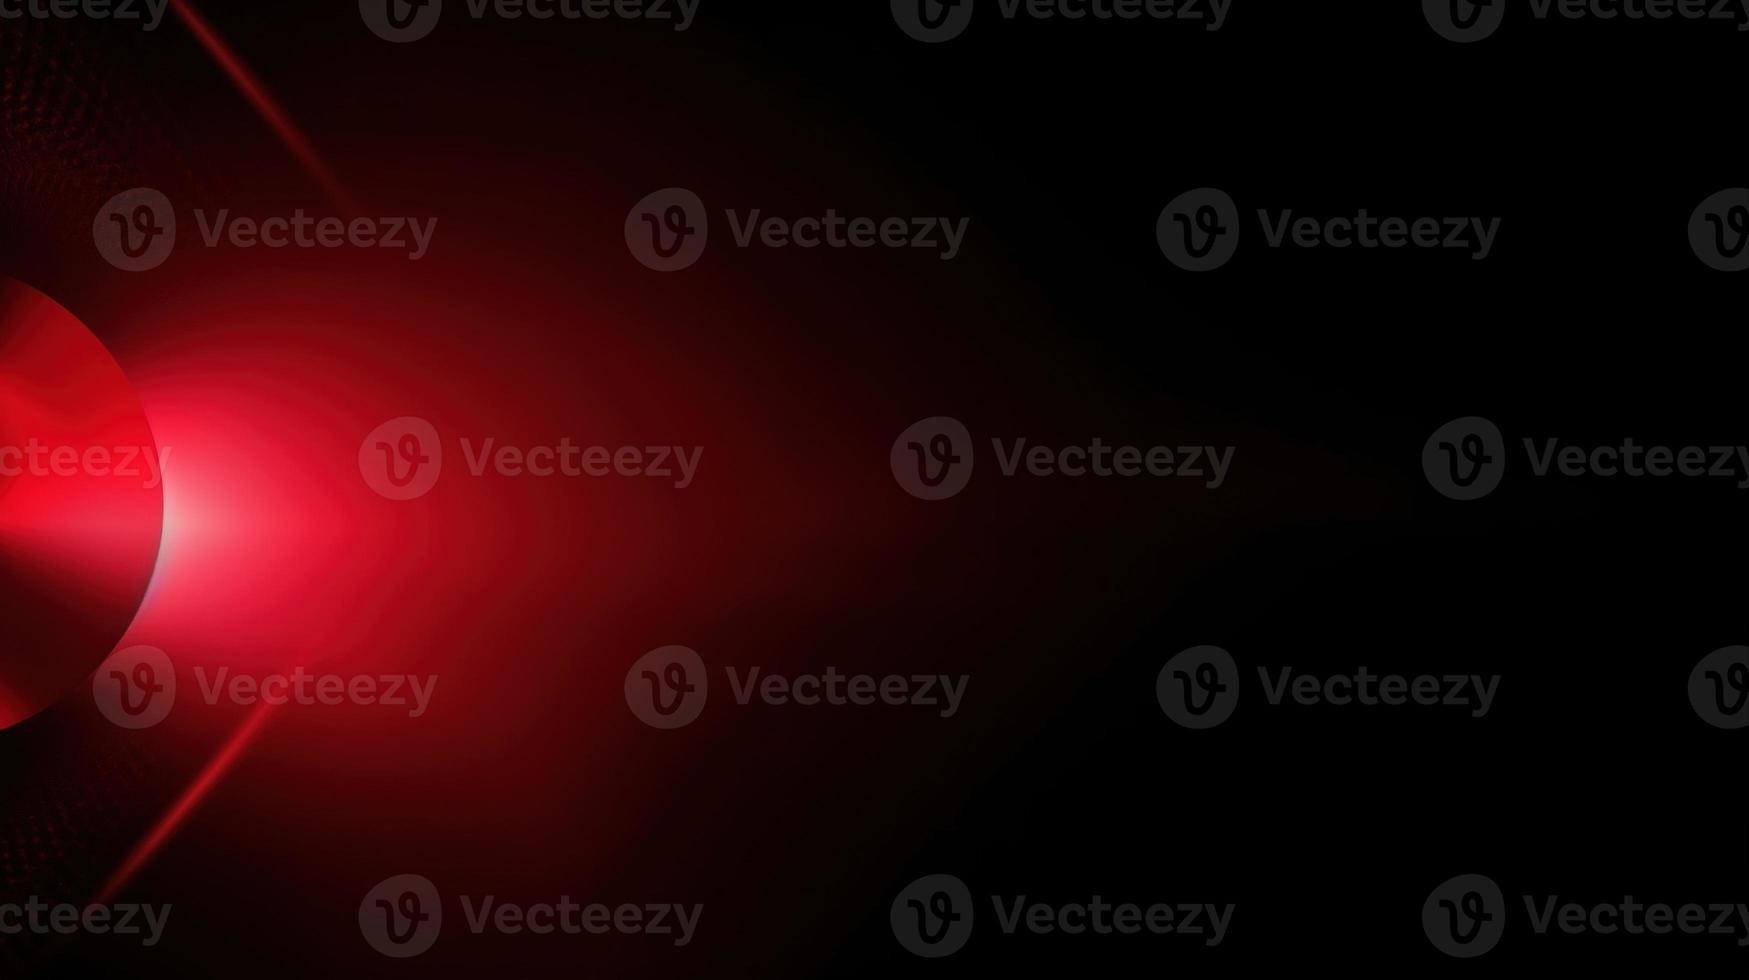 Abstract red light on black background with copy space for your text photo